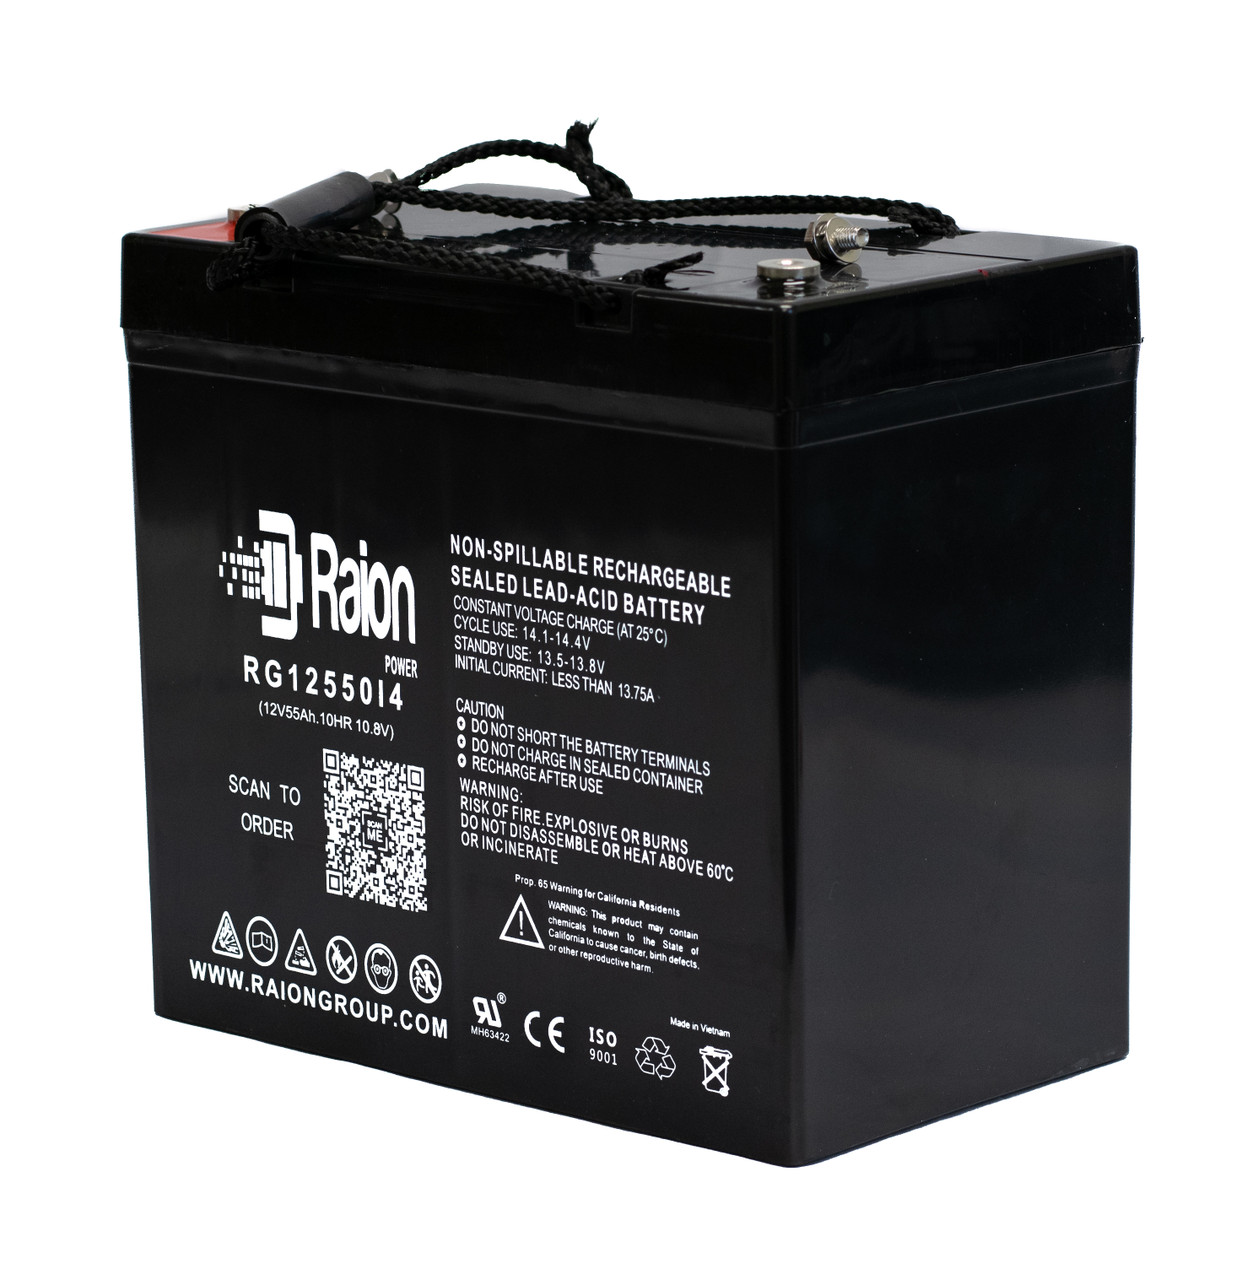 Raion Power 12V 55Ah 22NF Mobility Scooter Battery Replacement for Merits Health Products P120